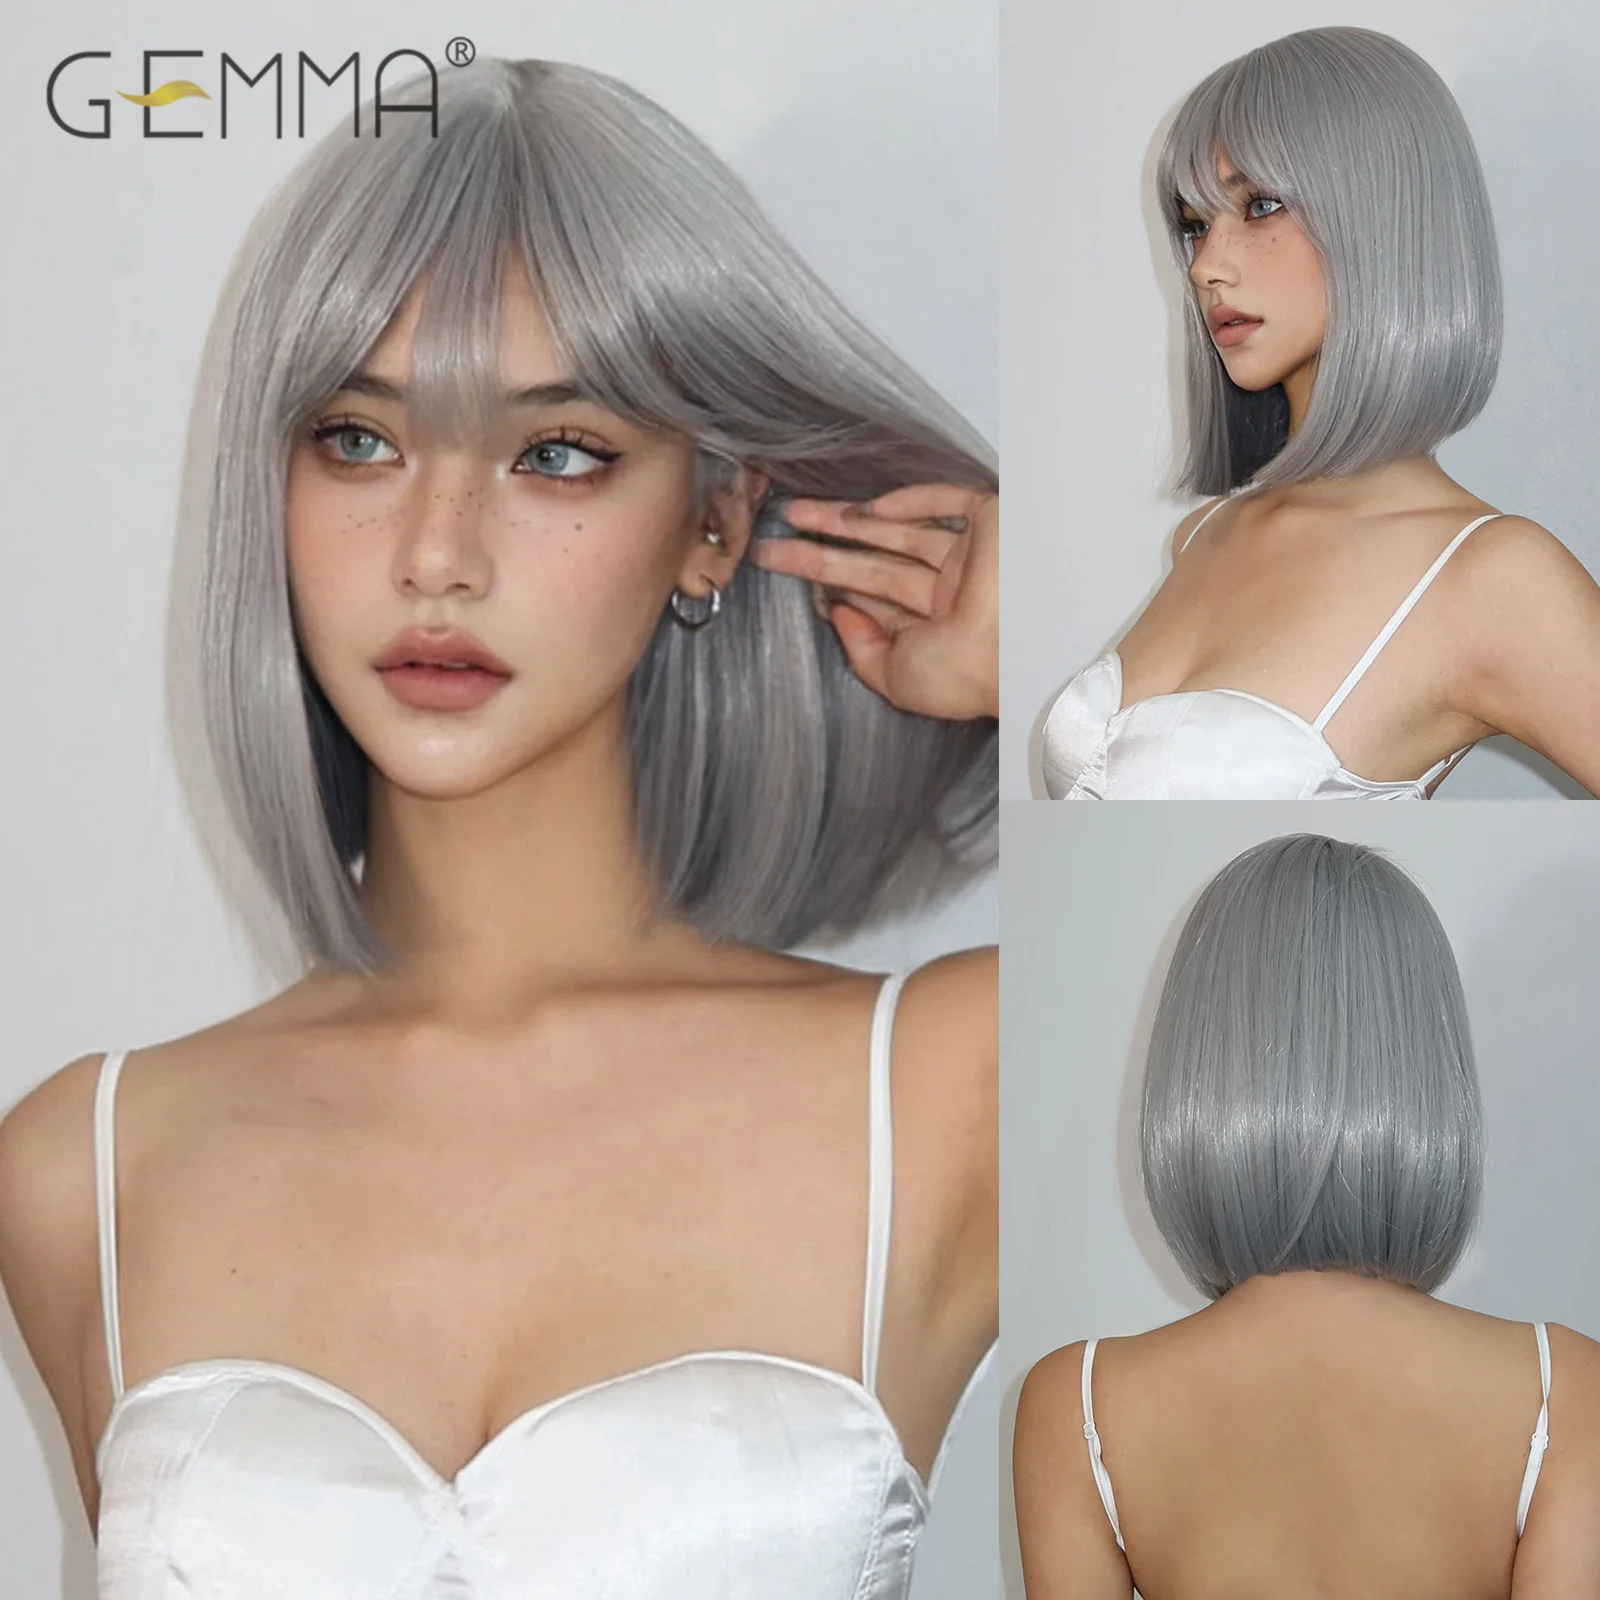 Silver Gray Short Straight Wig Synthetic Bob Wigs with Bangs for White Women Cosplay Daily Use Wig Natural Hair Heat Resistant esin long synthetic natural straight brown ombre blonde hair wigs with bangs heat resistant hair wigs for black women